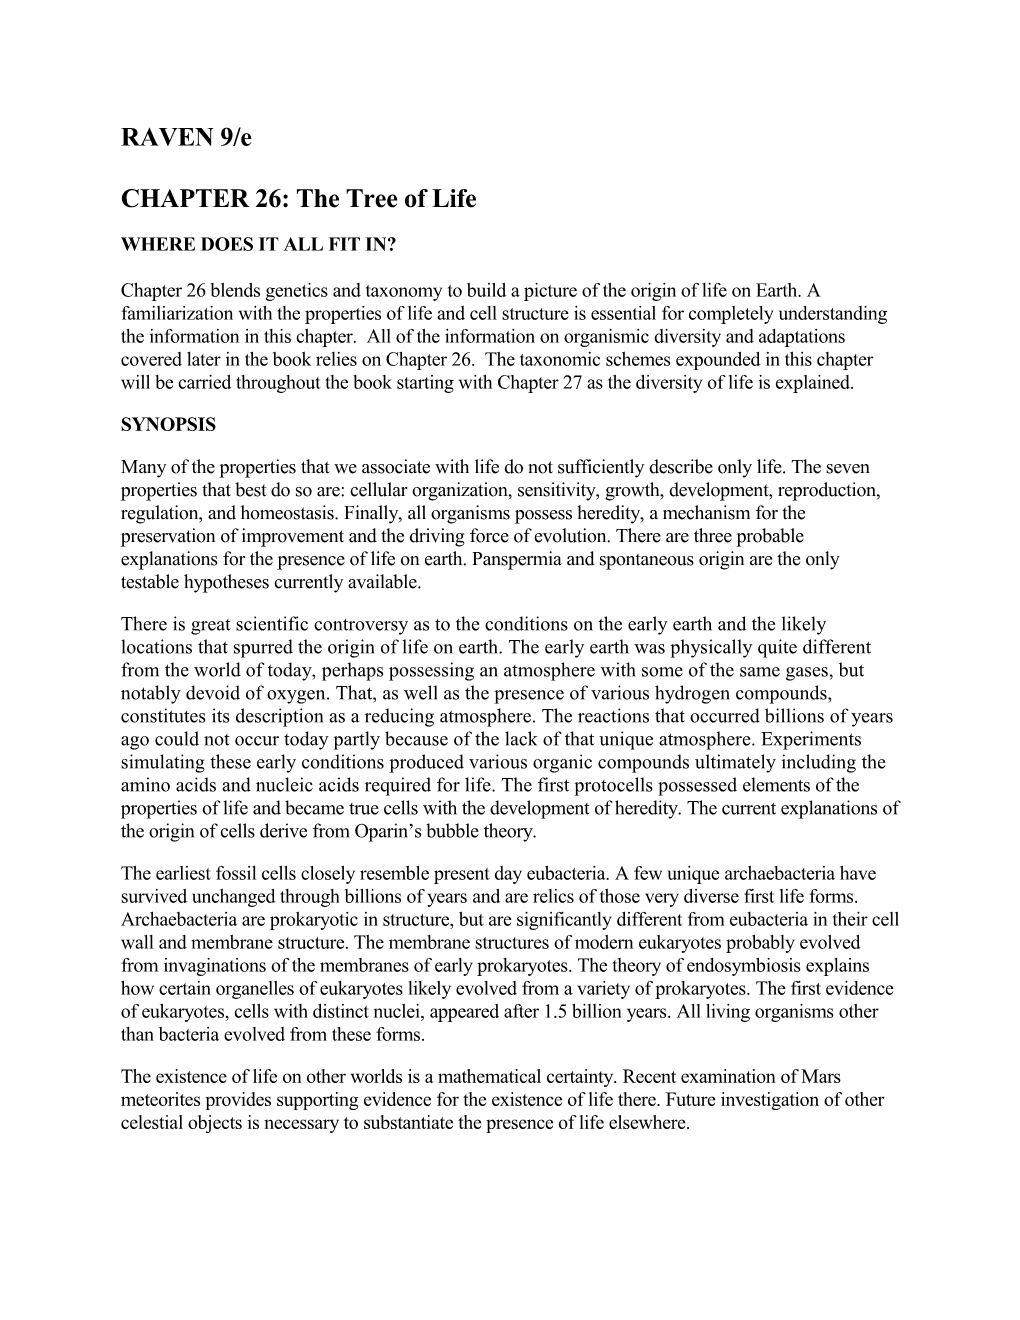 CHAPTER 26: the Tree of Life